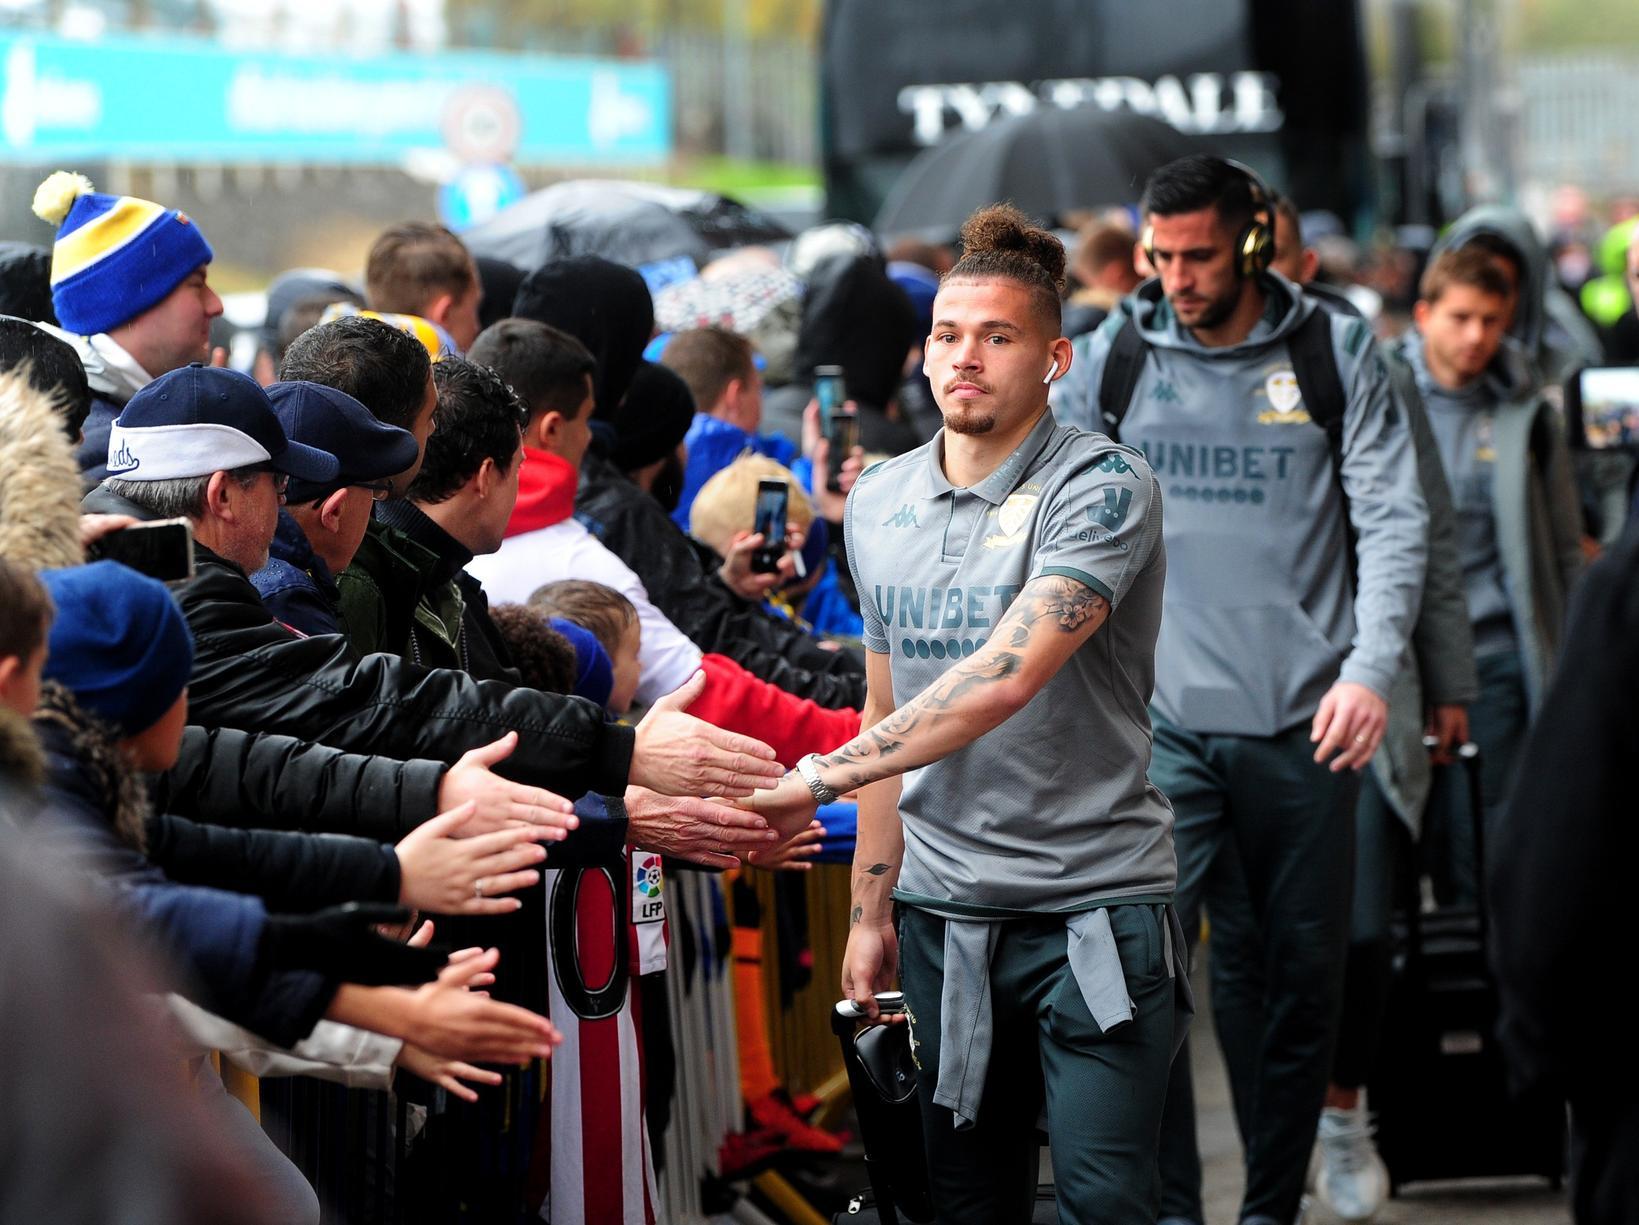 Fans line up to see local lad Kalvin Phillips and the rest of the team arrive for the game.